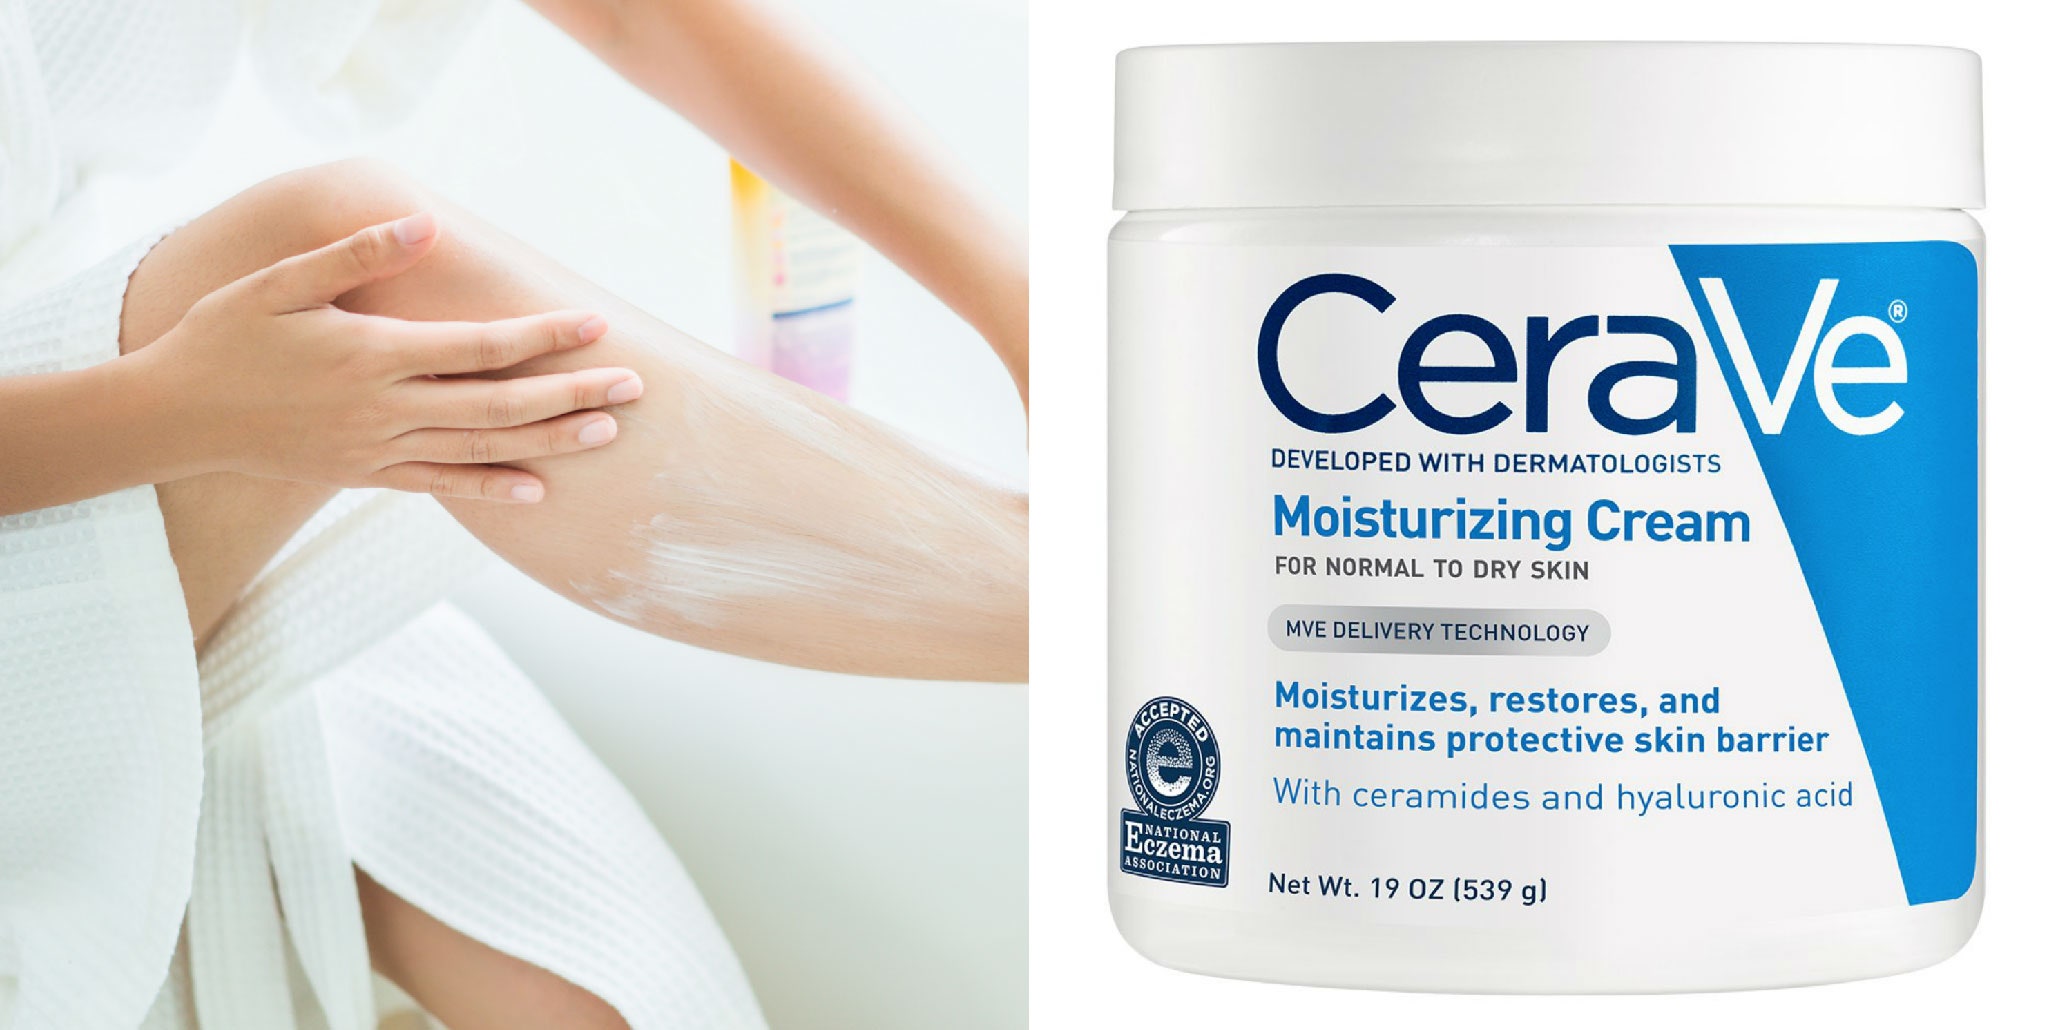 CeraVes Moisturizing Cream Soothes Dry Skin Like a Soft ...